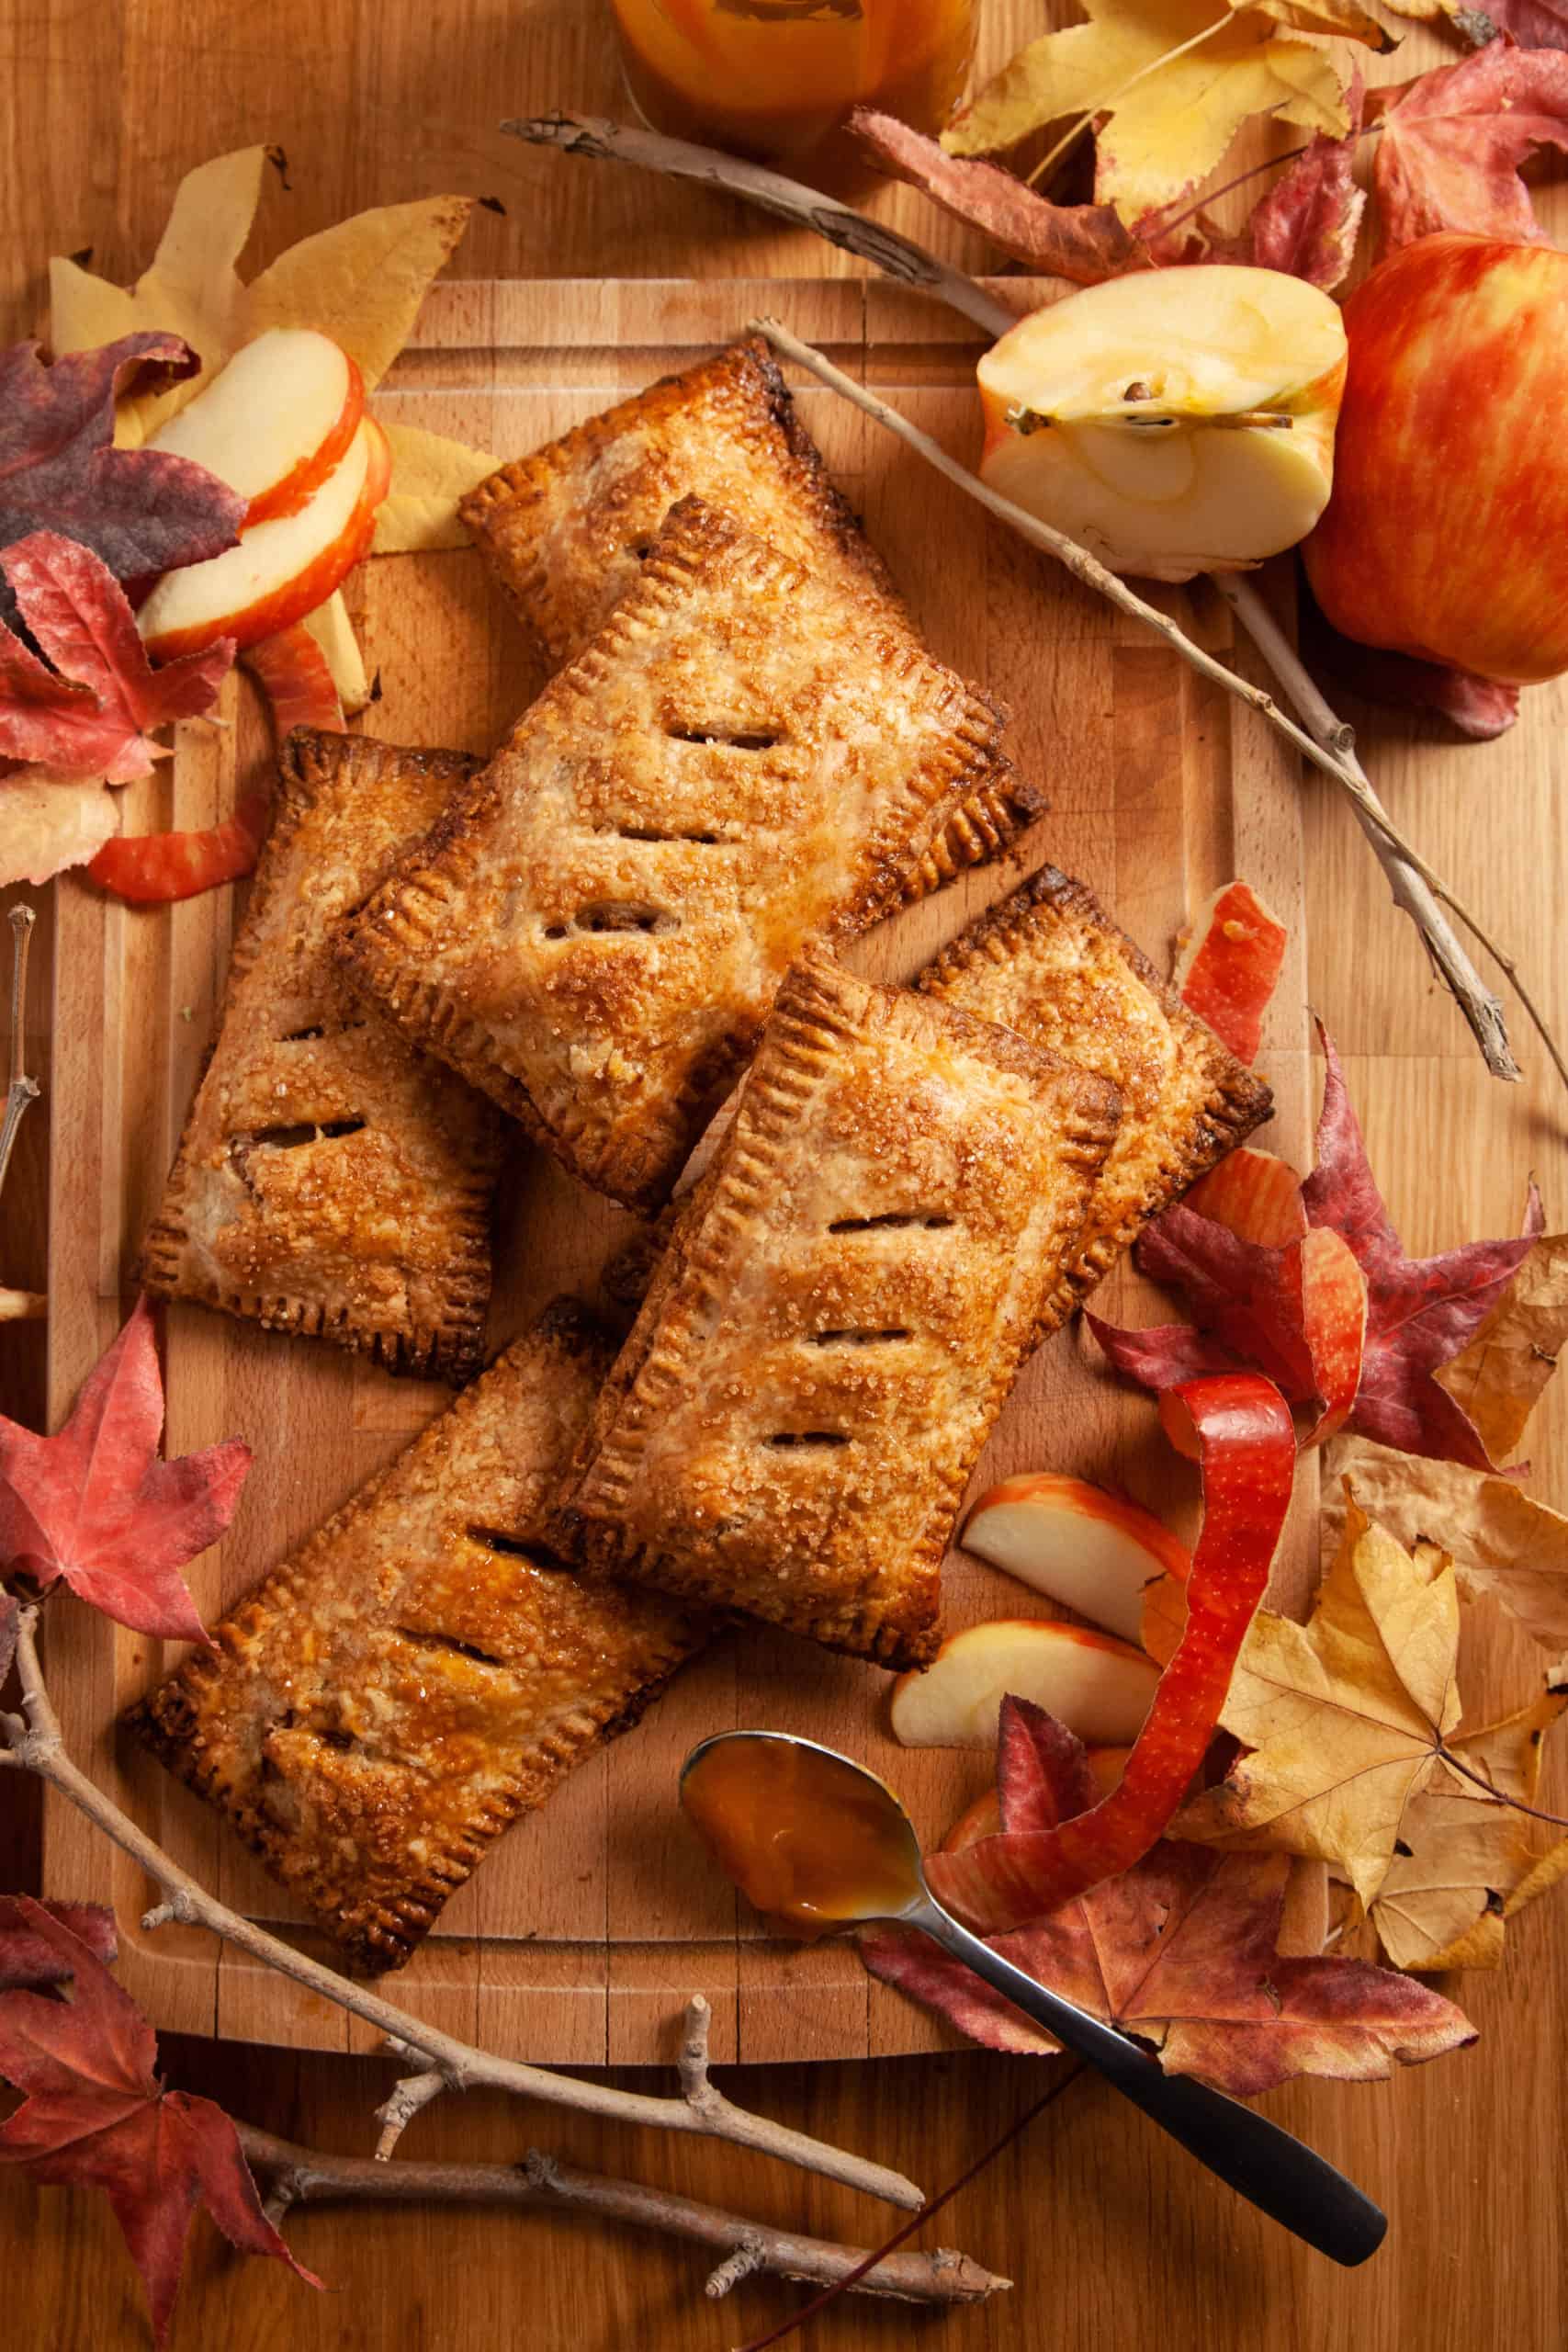 Apple hand pies with fall leaves and caramel